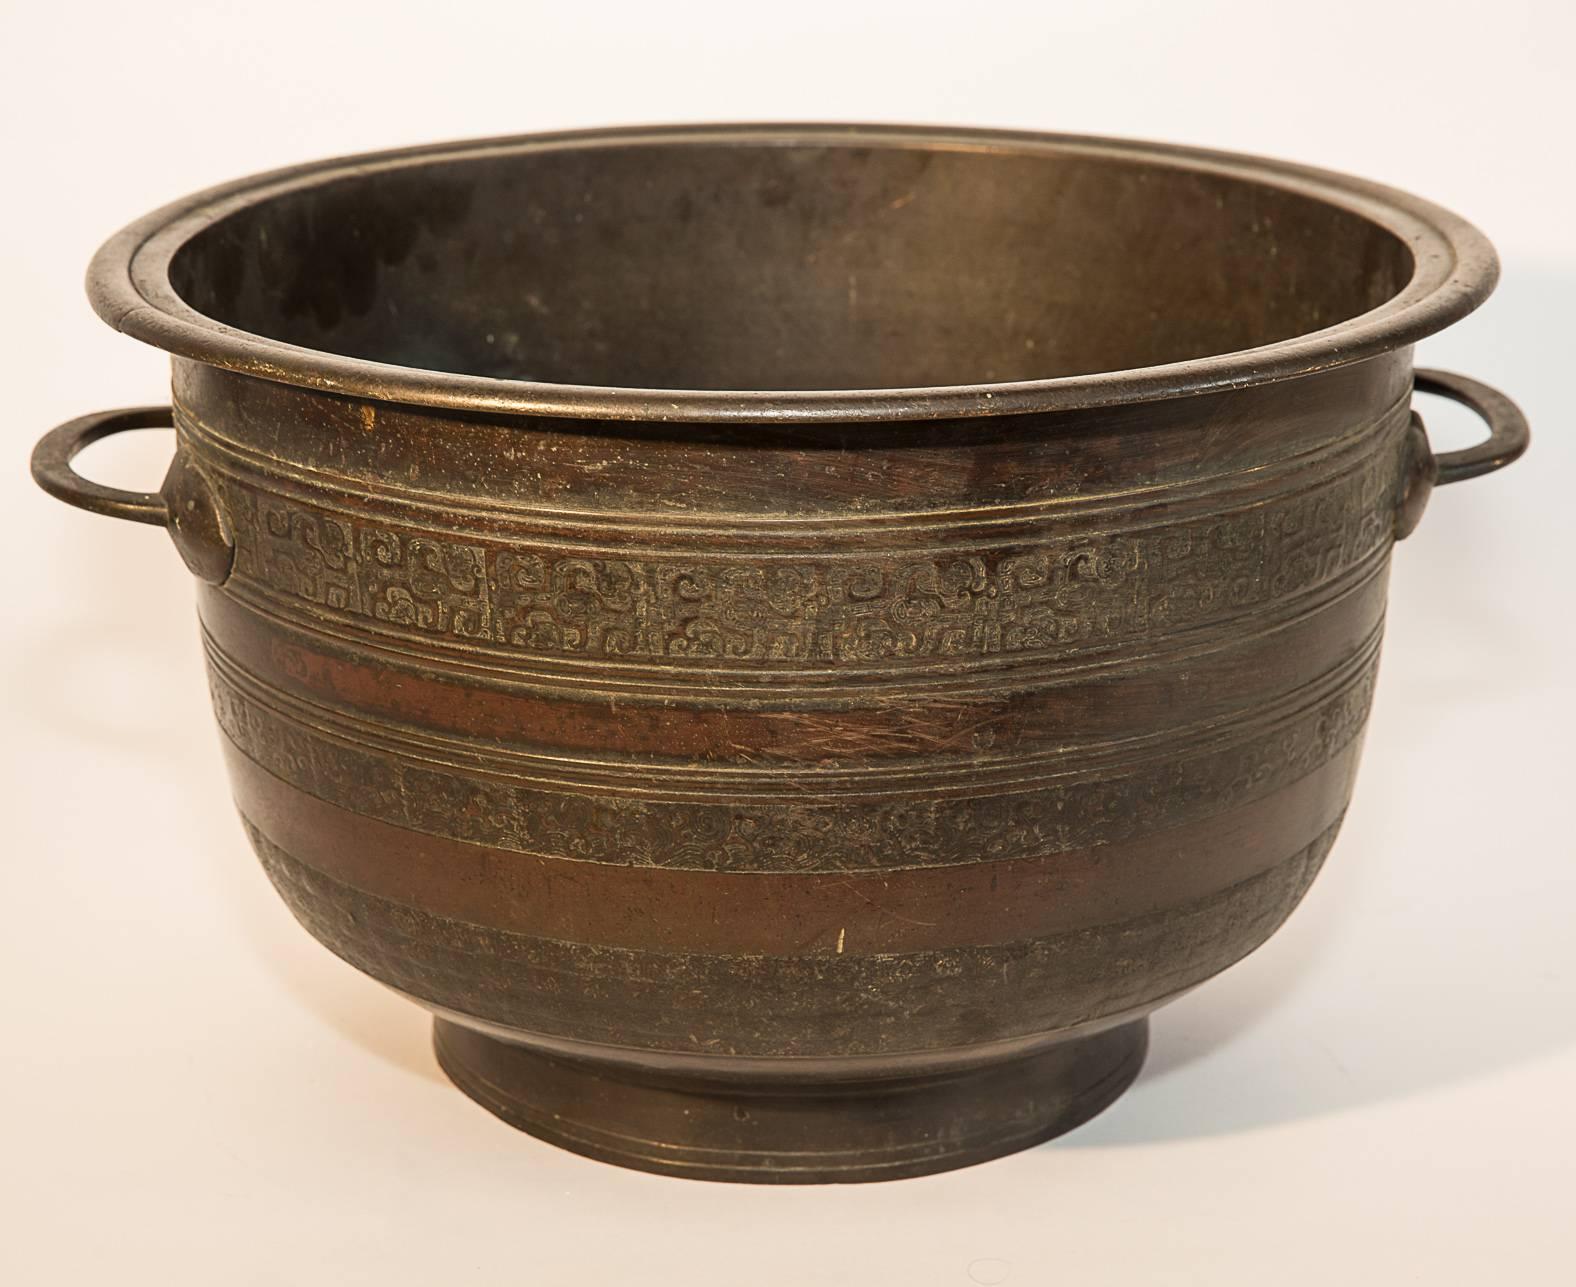 An unusual and very decorative Chinese bronze censer Ming period. Intricate and fine decoration. It seems the mark has been rubbed off, might be at the Revolution time.